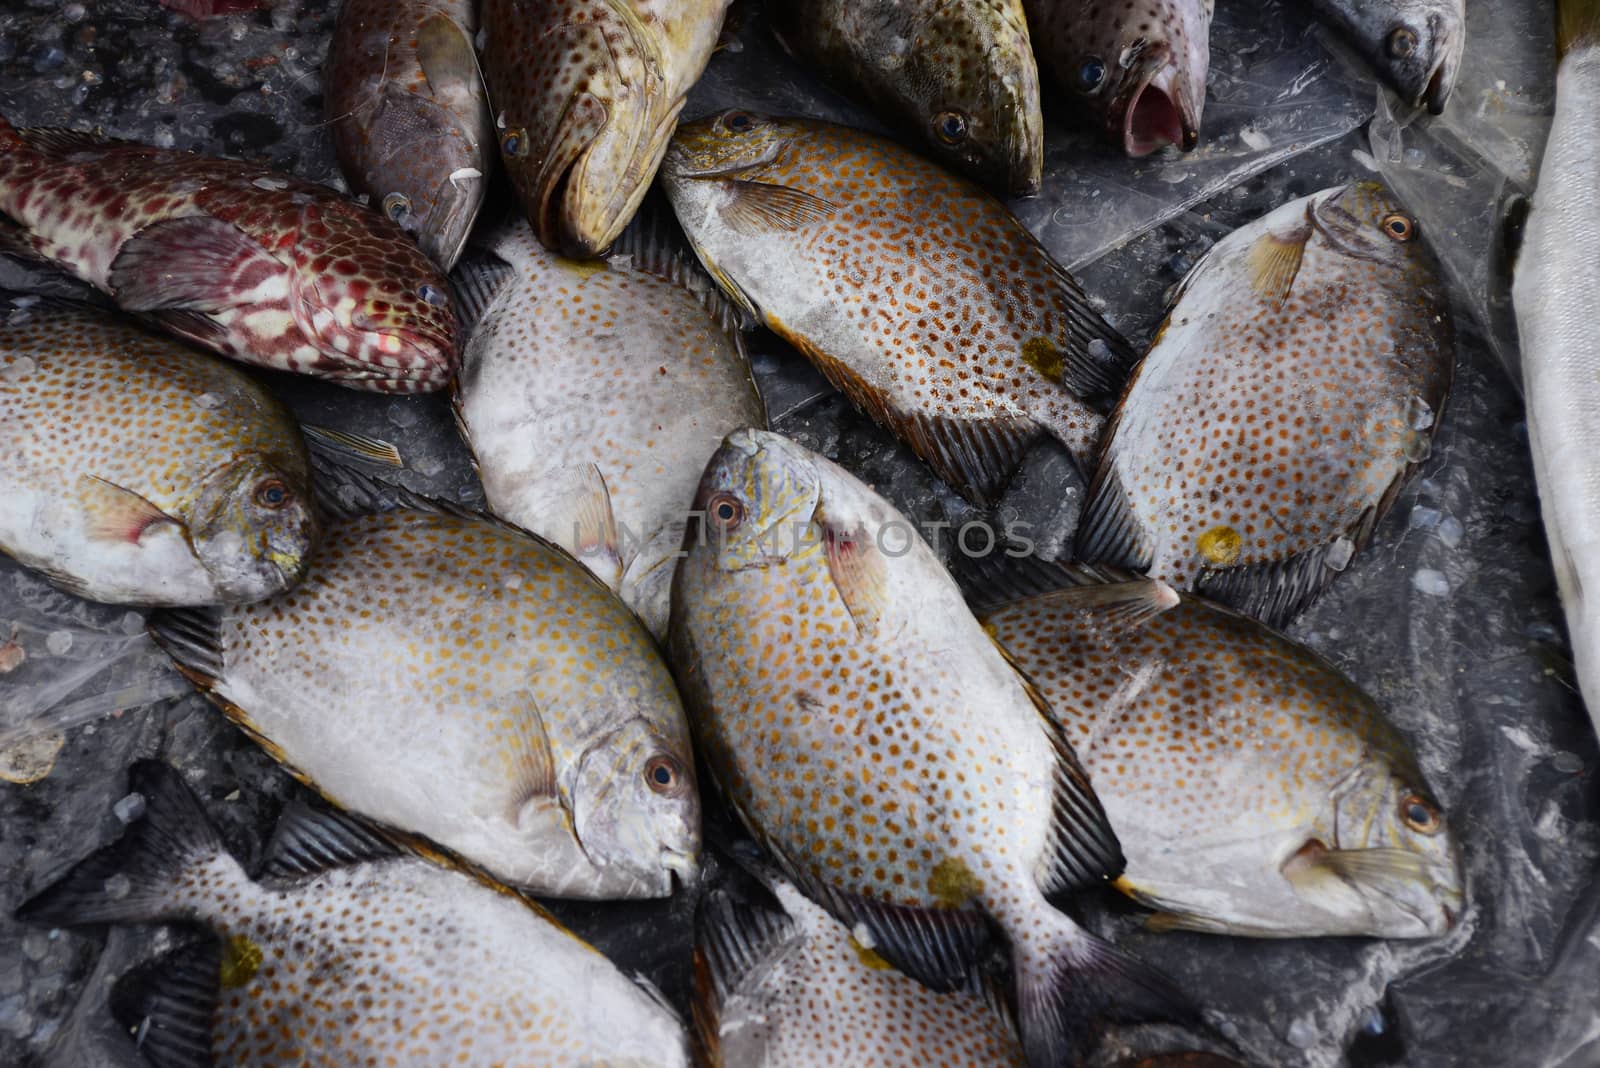 golden rabbitfish Sell in fresh seafood market by ideation90